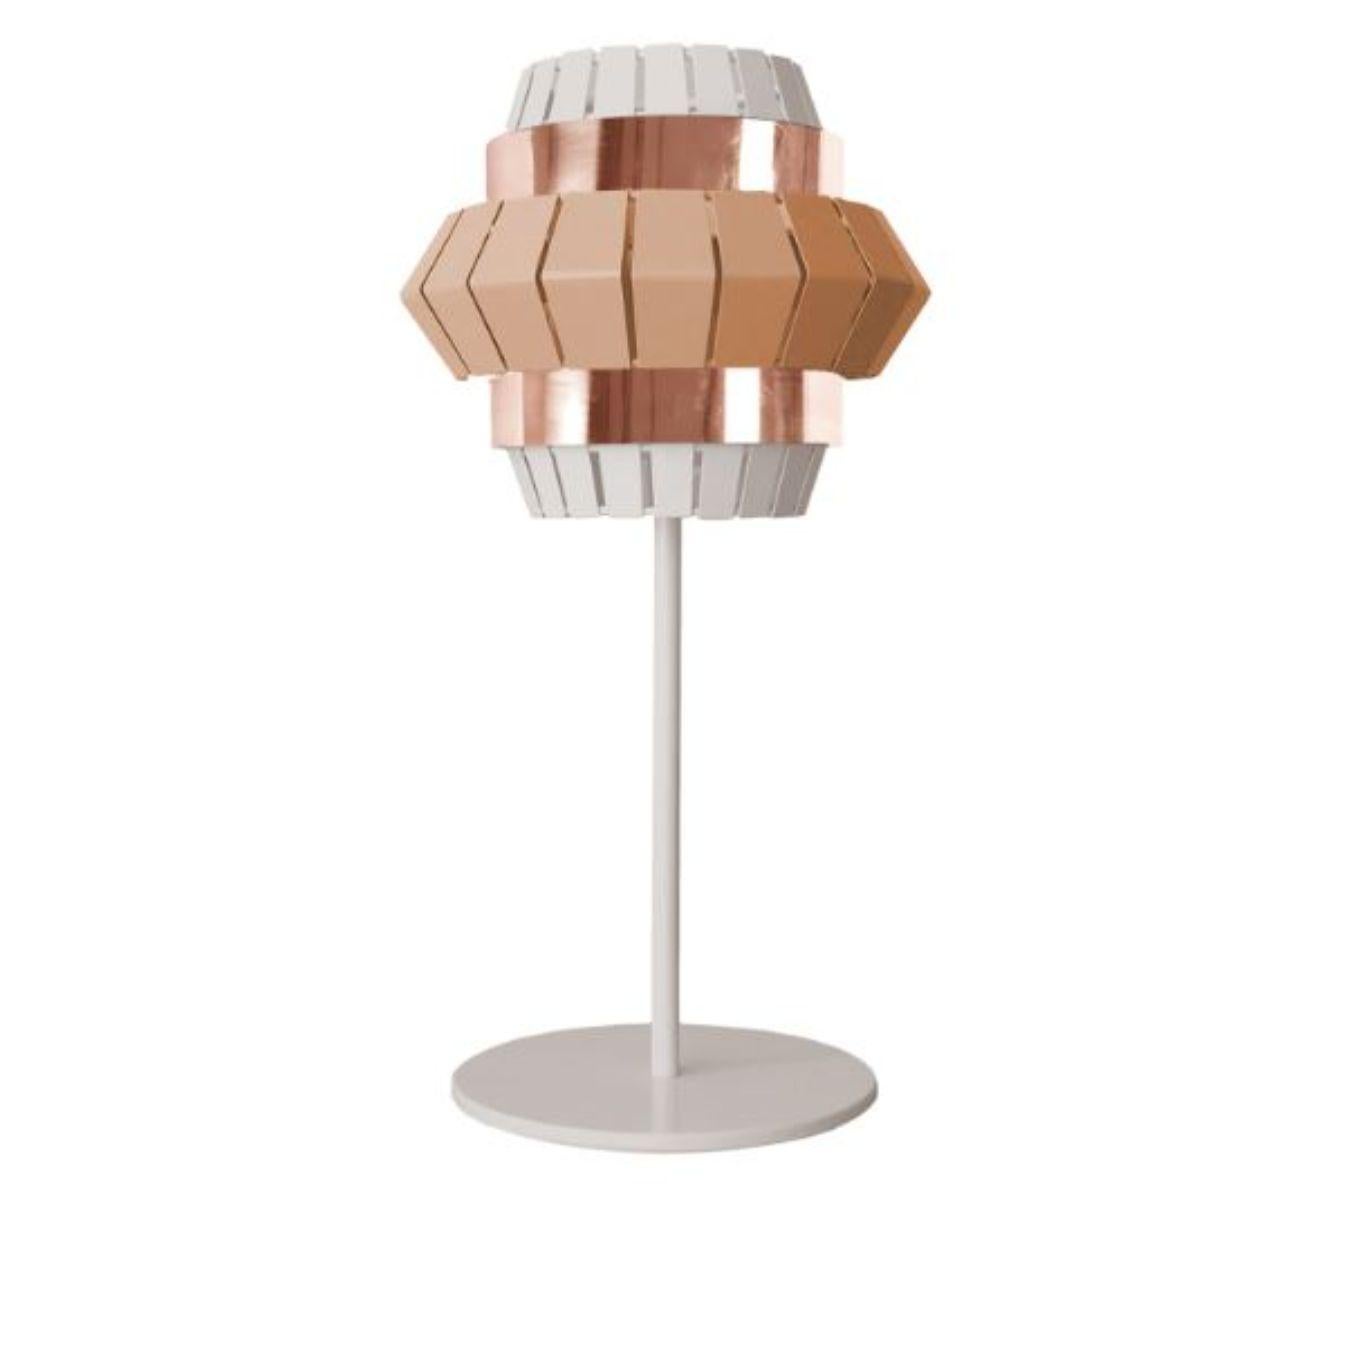 Ivory and Salmon comb table lamp with copper ring by Dooq
Dimensions: W 25.5 x D 25.5 x H 60 cm
Materials: lacquered metal, polished copper.
Also available in different colors and materials.

Information:
230V/50Hz
E14/1x20W